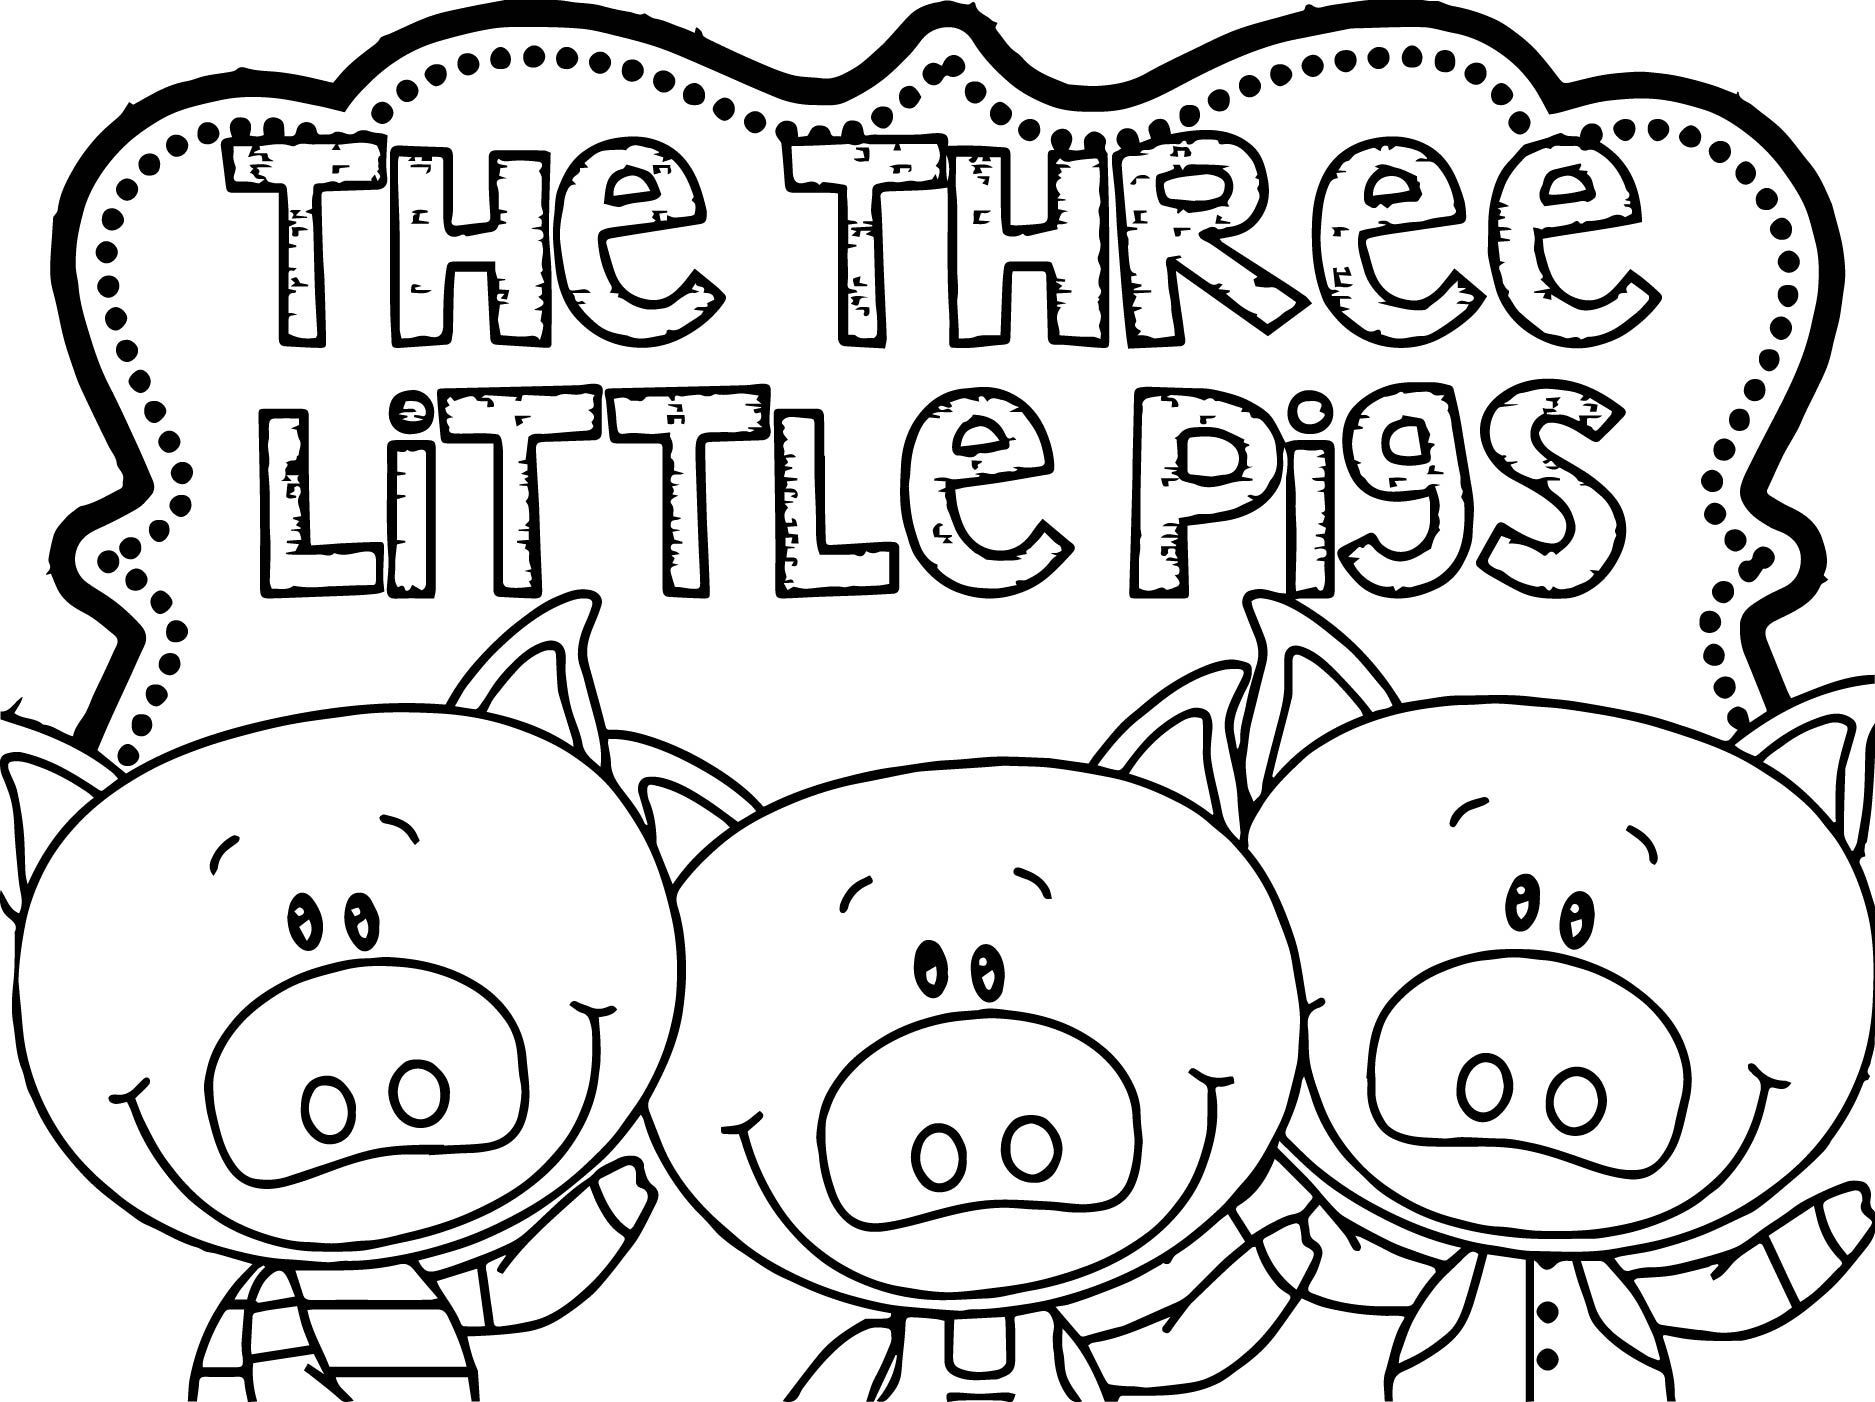 Awesome three little pigs coloring page little pigs three little pigs bear coloring pages